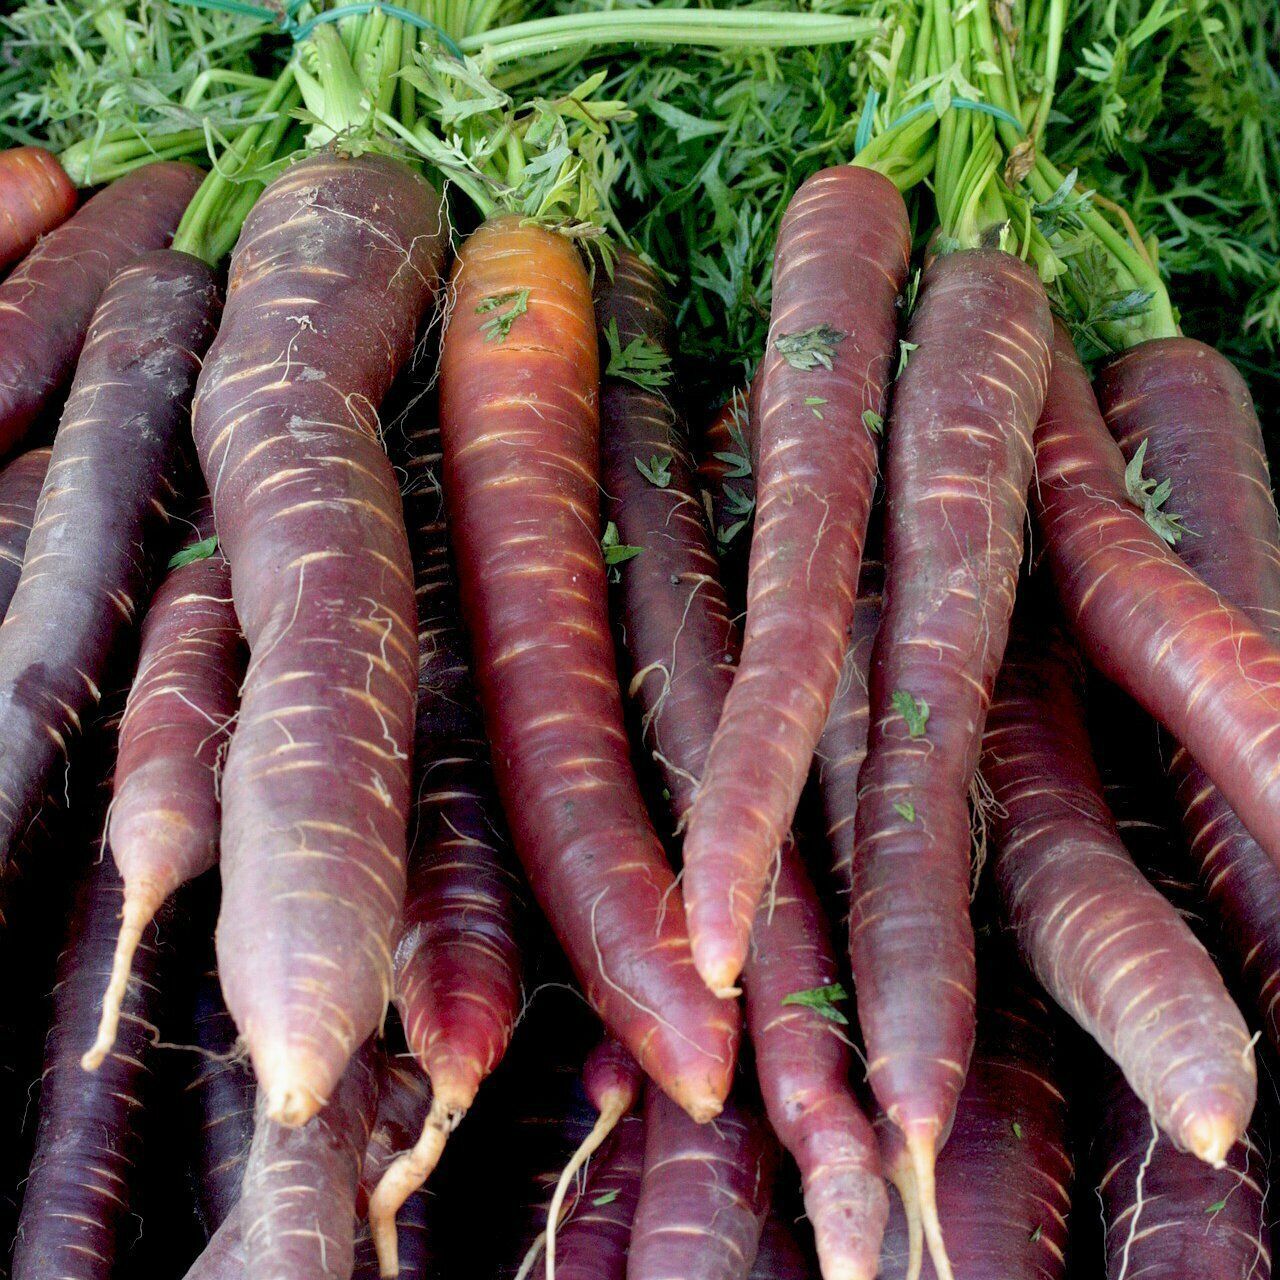 Primary image for Cosmic Purple Carrot Seeds, Lycopene, NON-GMO, Variety Sizes, FREE SHIPPING